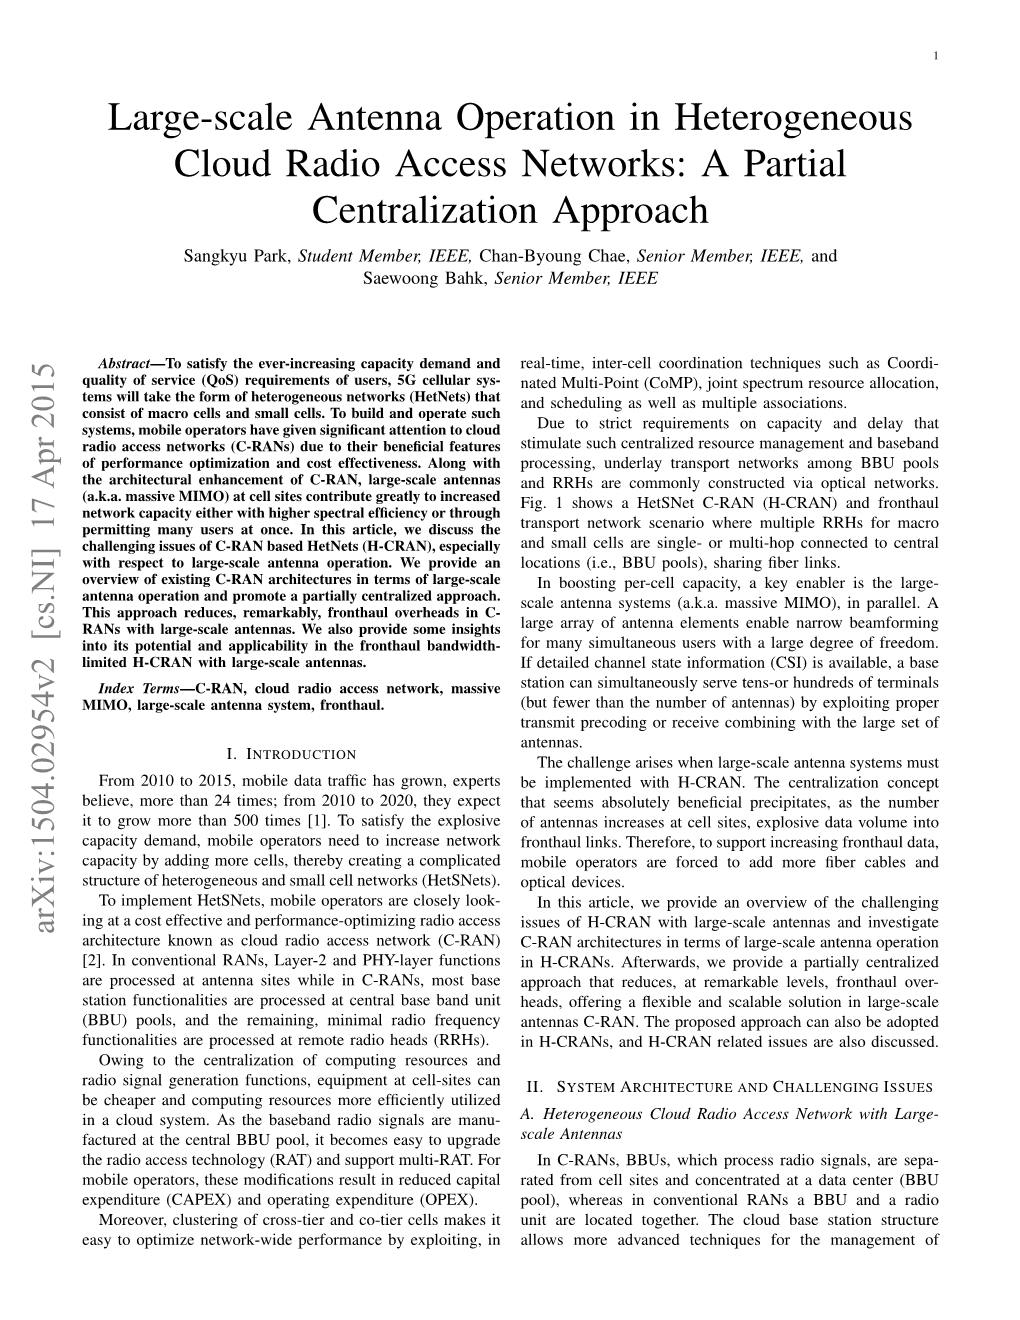 Large-Scale Antenna Operation in Heterogeneous Cloud Radio Access Networks: a Partial Centralization Approach